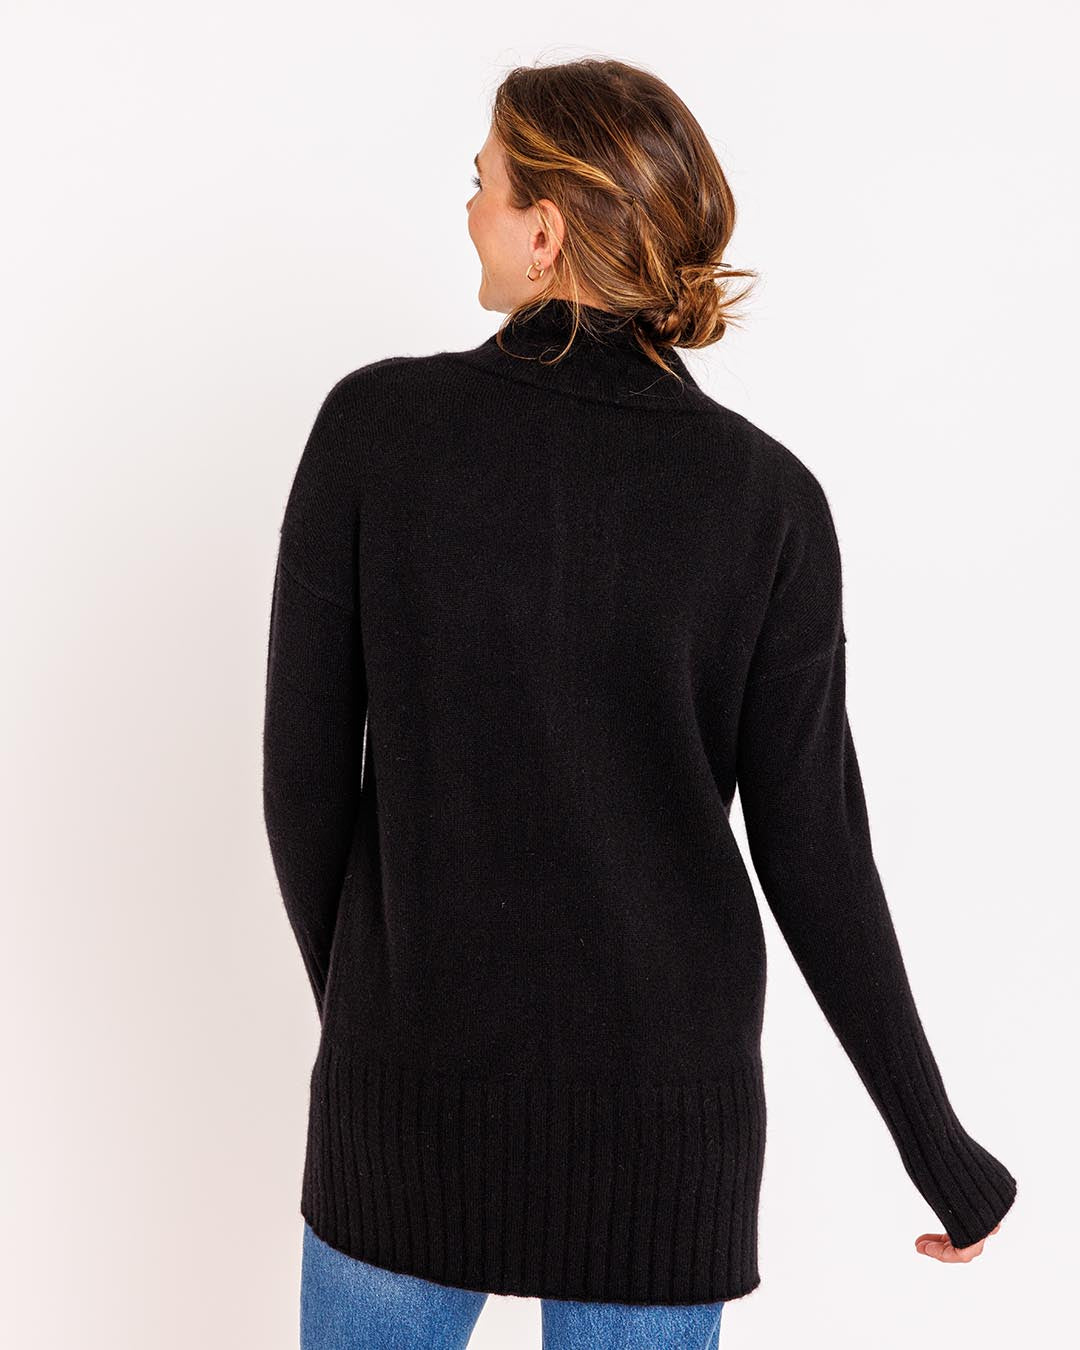 Caught Up With You Zip Front Sweater Black